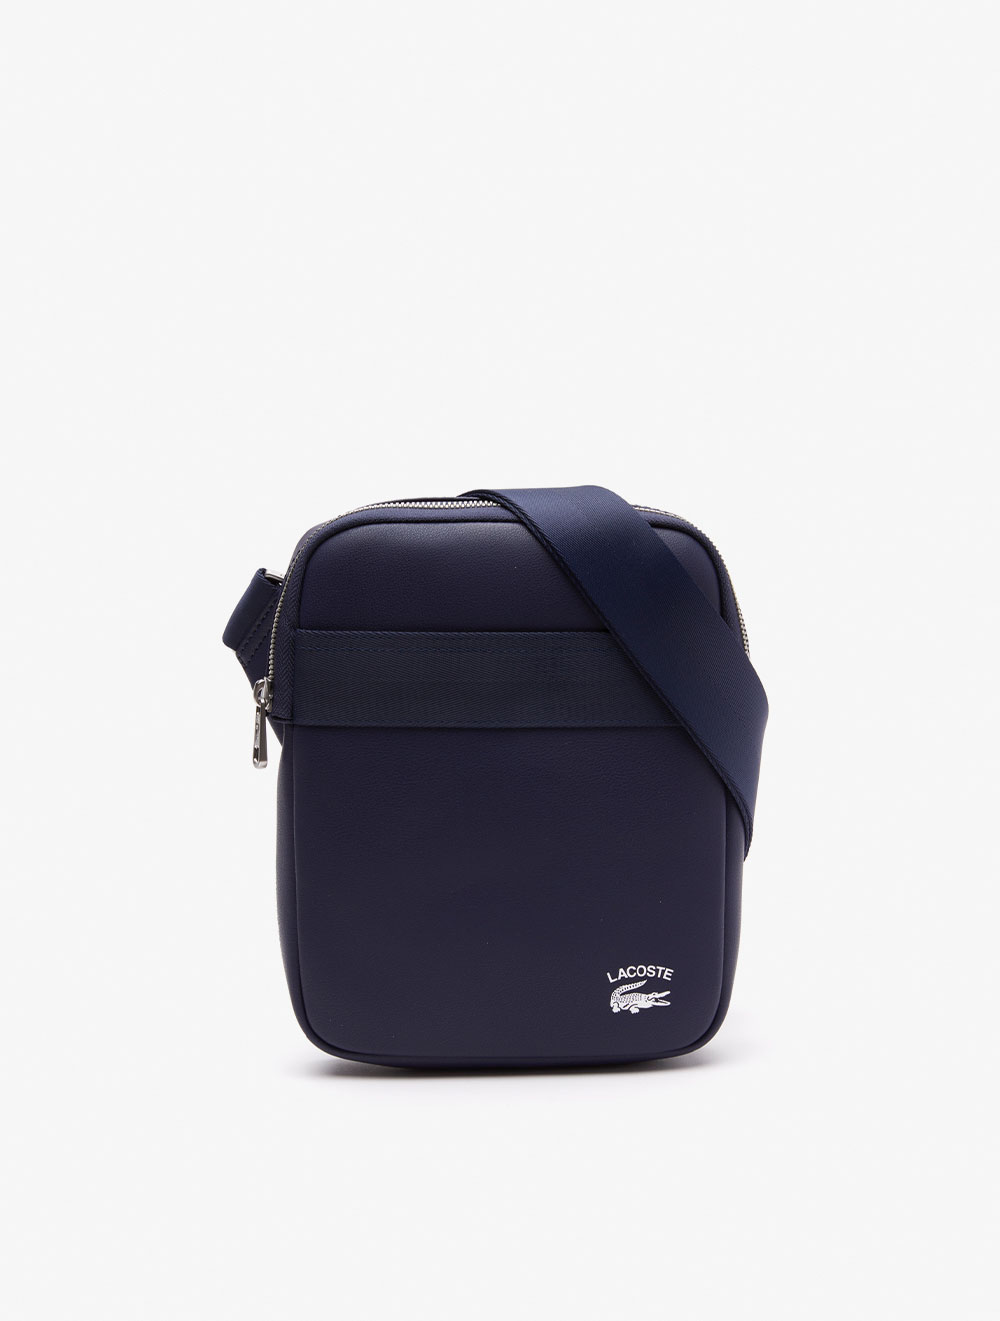 Fashion Men's Lacoste Contrast Branded Crossover Bag with genuine ...